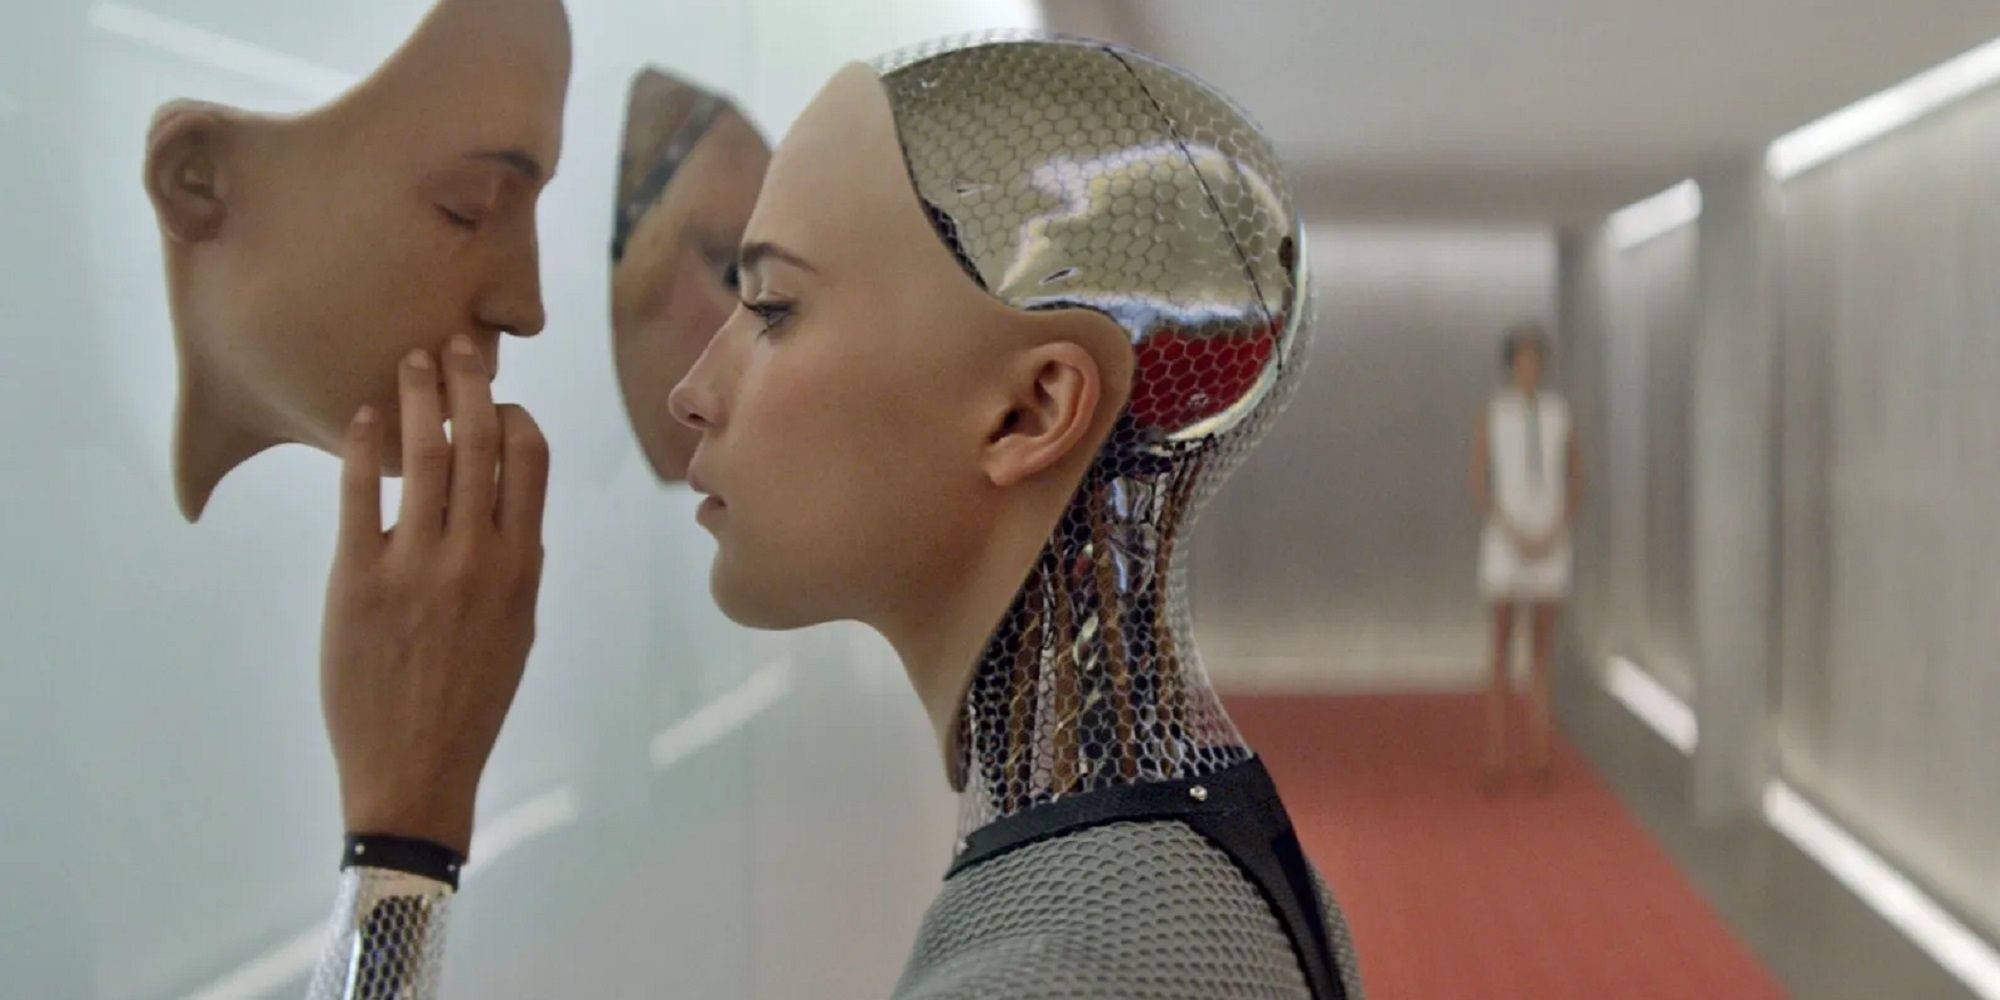 Ava looking at an A.I. prototype face in Ex Machina.